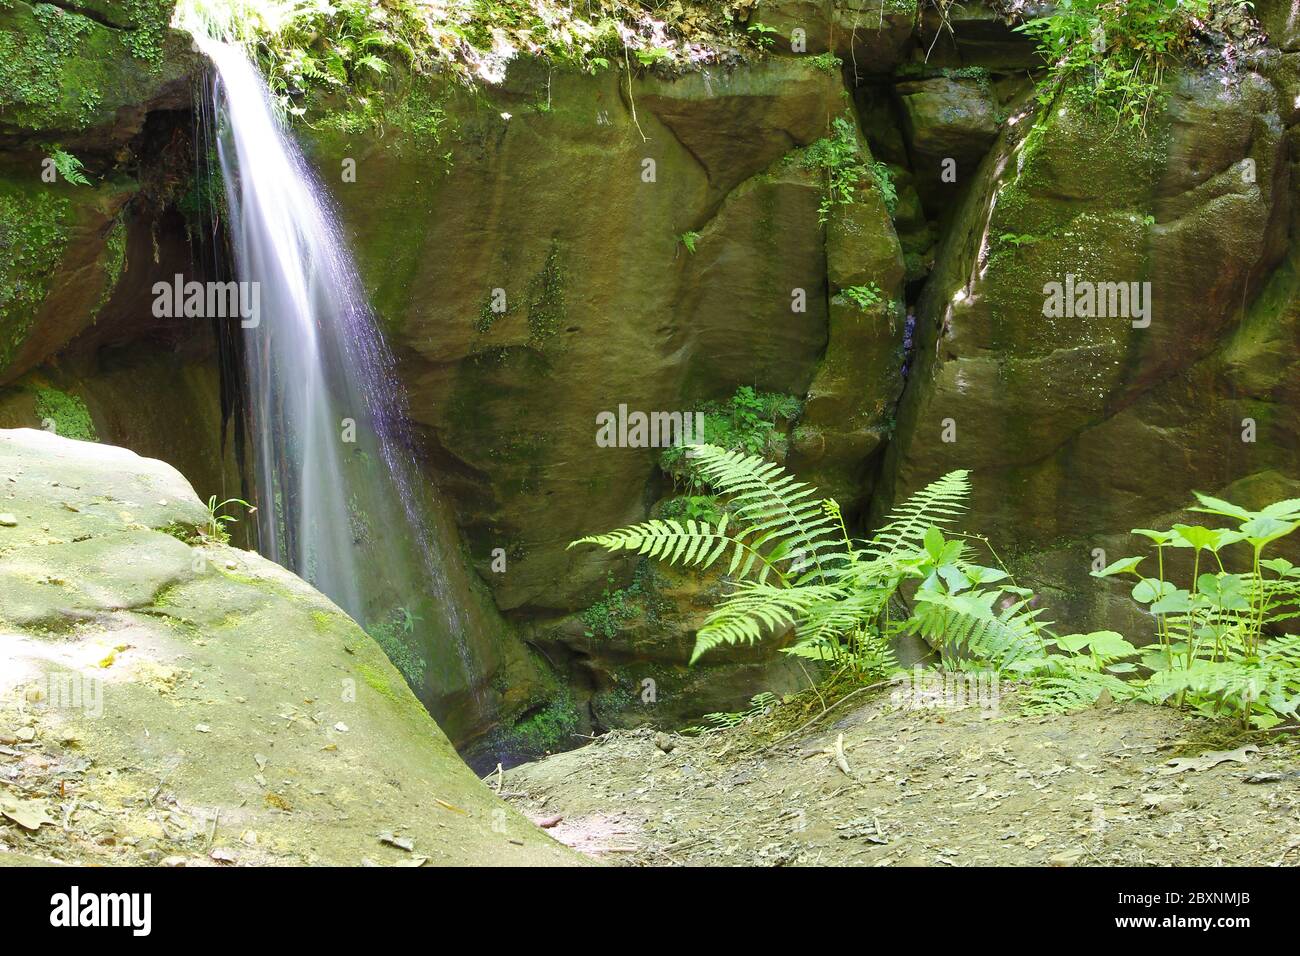 Cascate di Little Lyons, Mohican state Park, Ohio Foto Stock